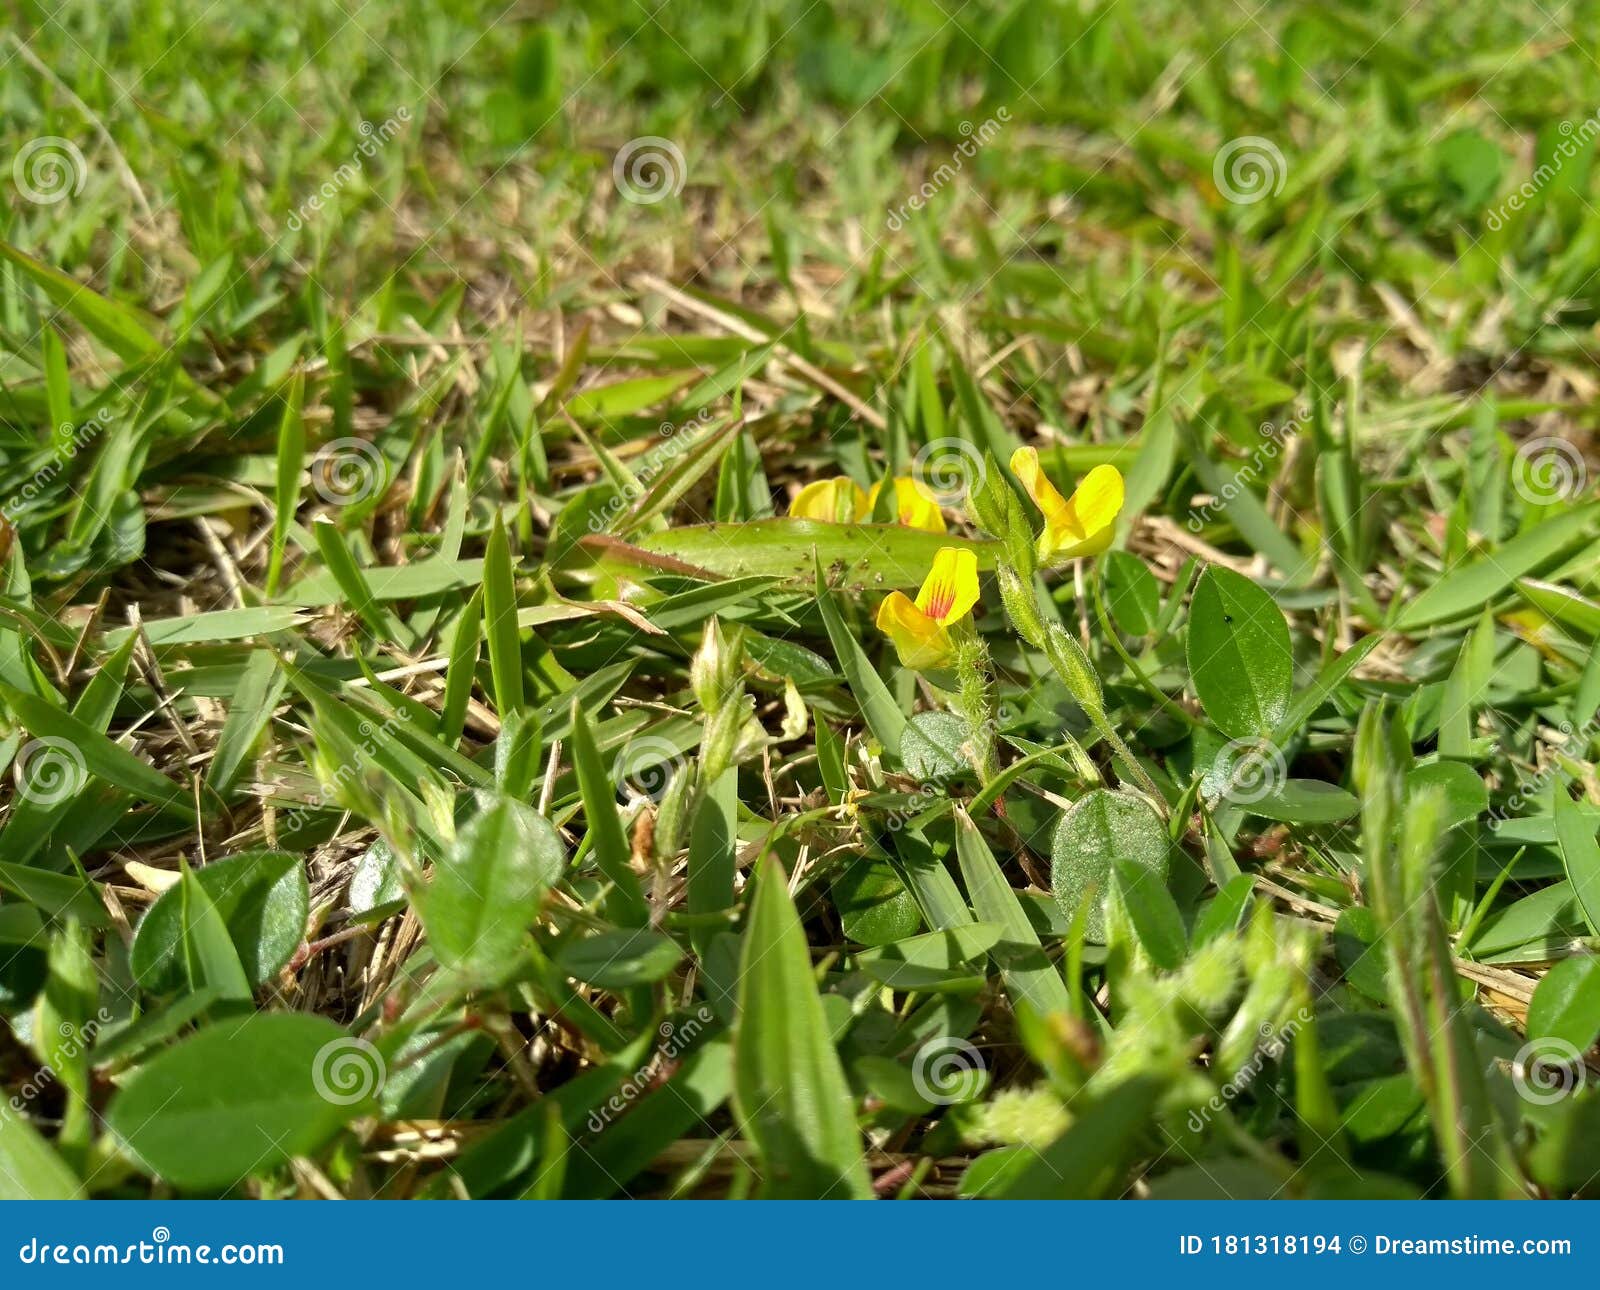 grass with beautiful yellow flower